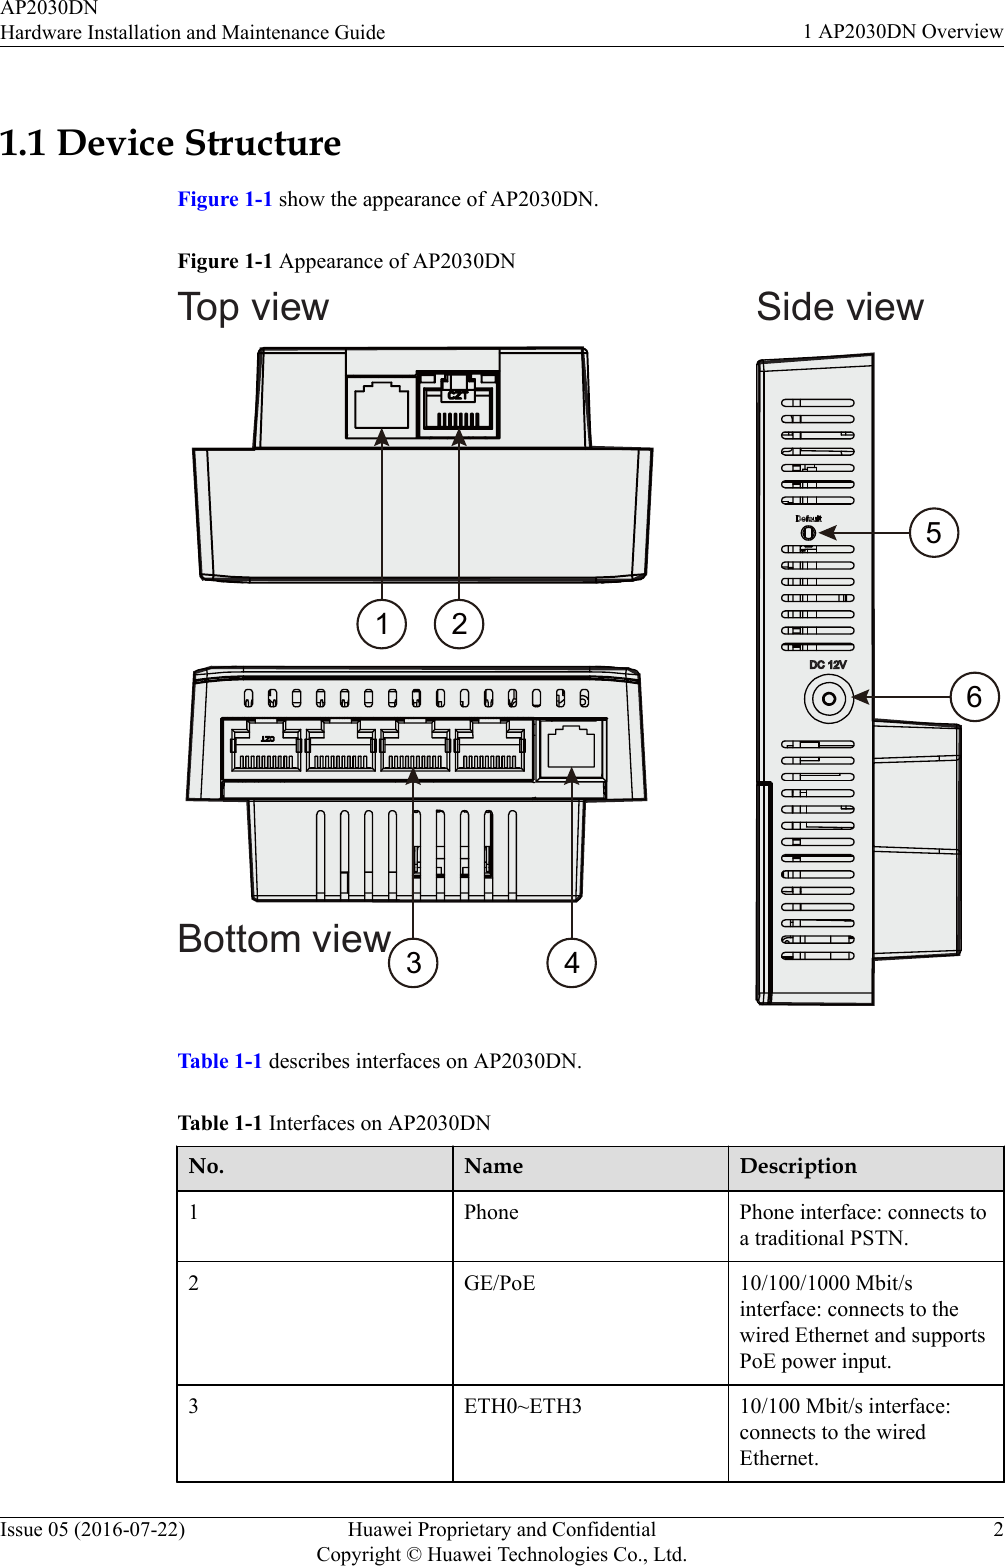 1.1 Device StructureFigure 1-1 show the appearance of AP2030DN.Figure 1-1 Appearance of AP2030DNSide viewDC 12V156Top view23 4Bottom viewTable 1-1 describes interfaces on AP2030DN.Table 1-1 Interfaces on AP2030DNNo. Name Description1 Phone Phone interface: connects toa traditional PSTN.2 GE/PoE 10/100/1000 Mbit/sinterface: connects to thewired Ethernet and supportsPoE power input.3 ETH0~ETH3 10/100 Mbit/s interface:connects to the wiredEthernet.AP2030DNHardware Installation and Maintenance Guide 1 AP2030DN OverviewIssue 05 (2016-07-22) Huawei Proprietary and ConfidentialCopyright © Huawei Technologies Co., Ltd.2